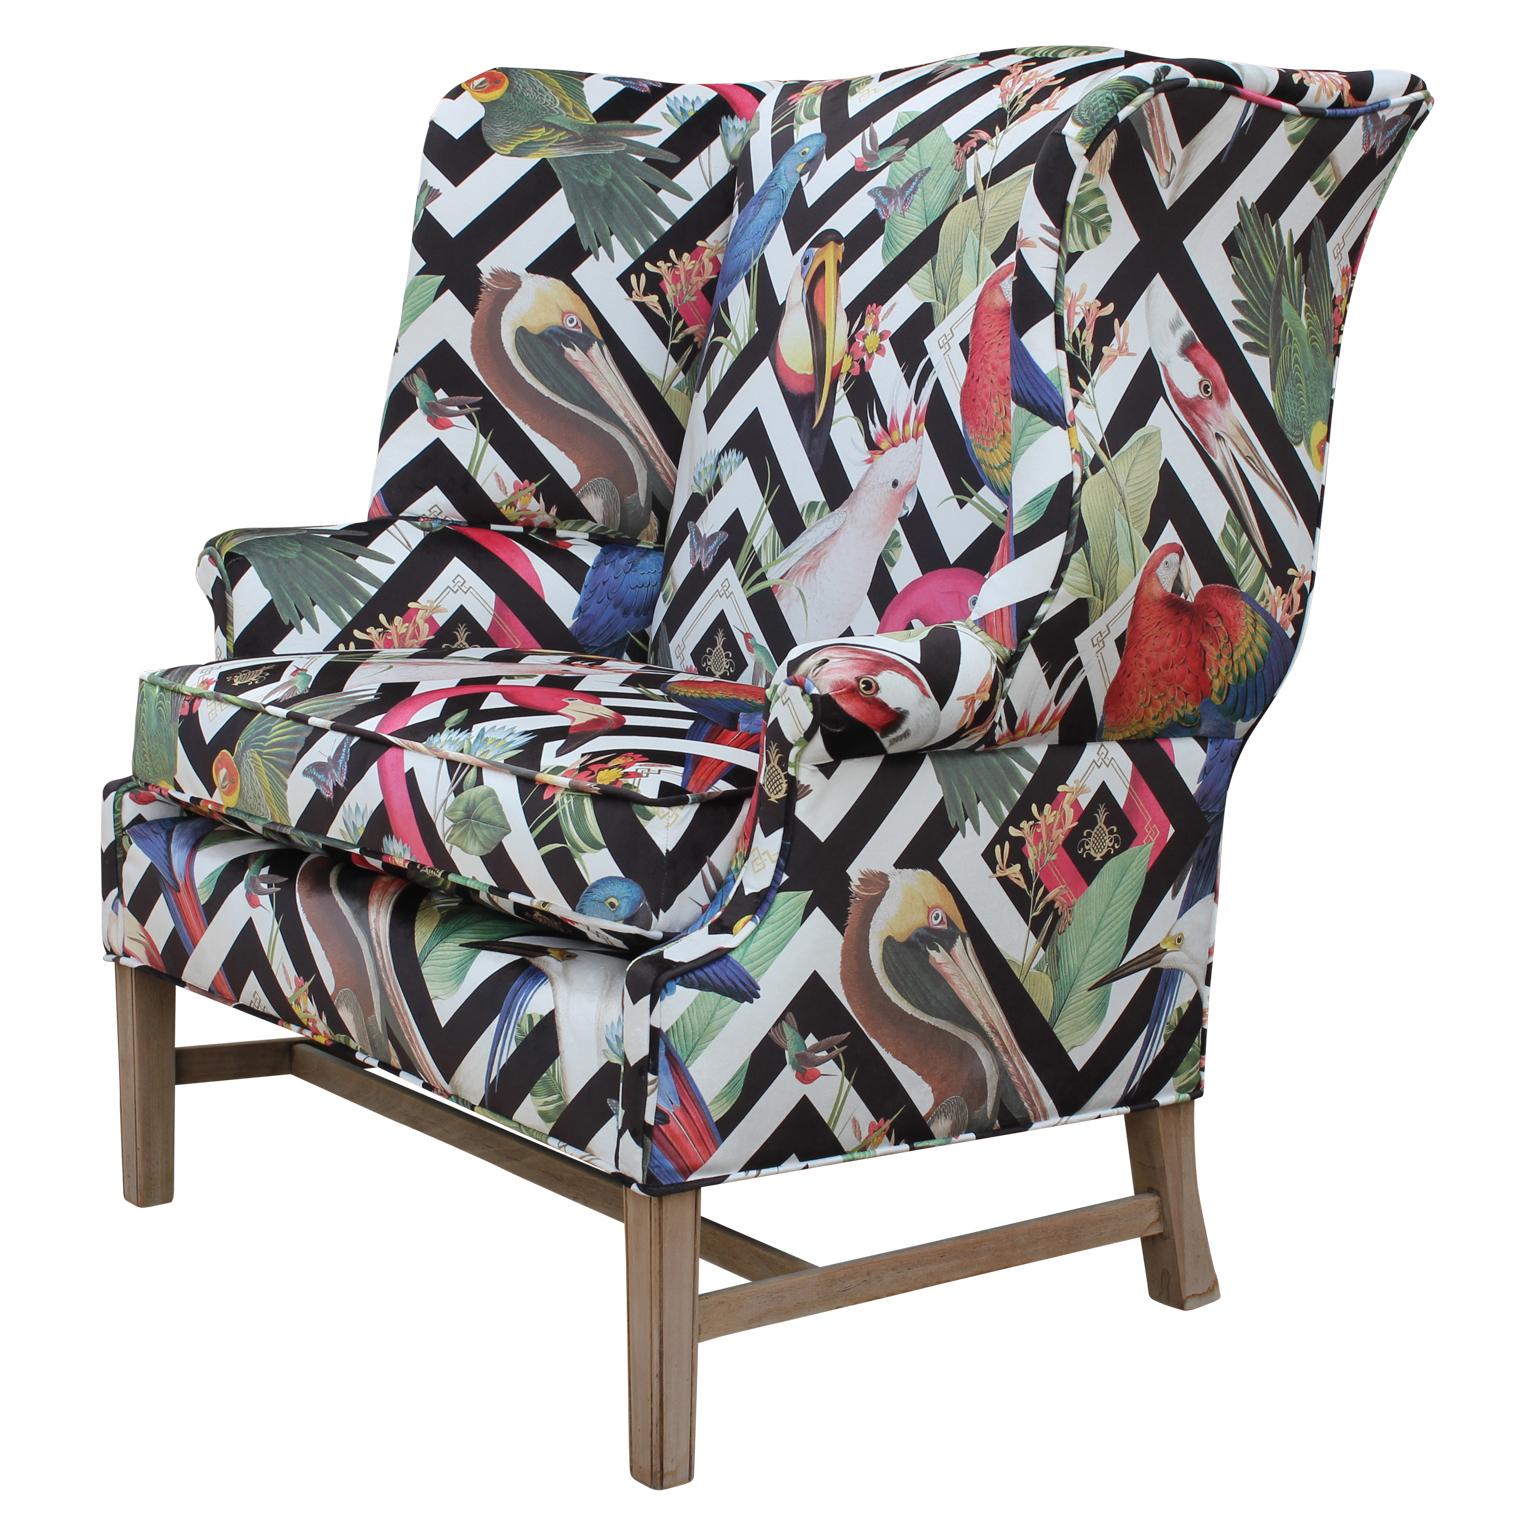 Bold Geometric modern tropical bird fabric wingback chair and a half / small settee / loveseat.

Mid-20th century wingback chair and a half customized in a stunning divine savages tropical geometric velvet. The tropical birds pop against the black